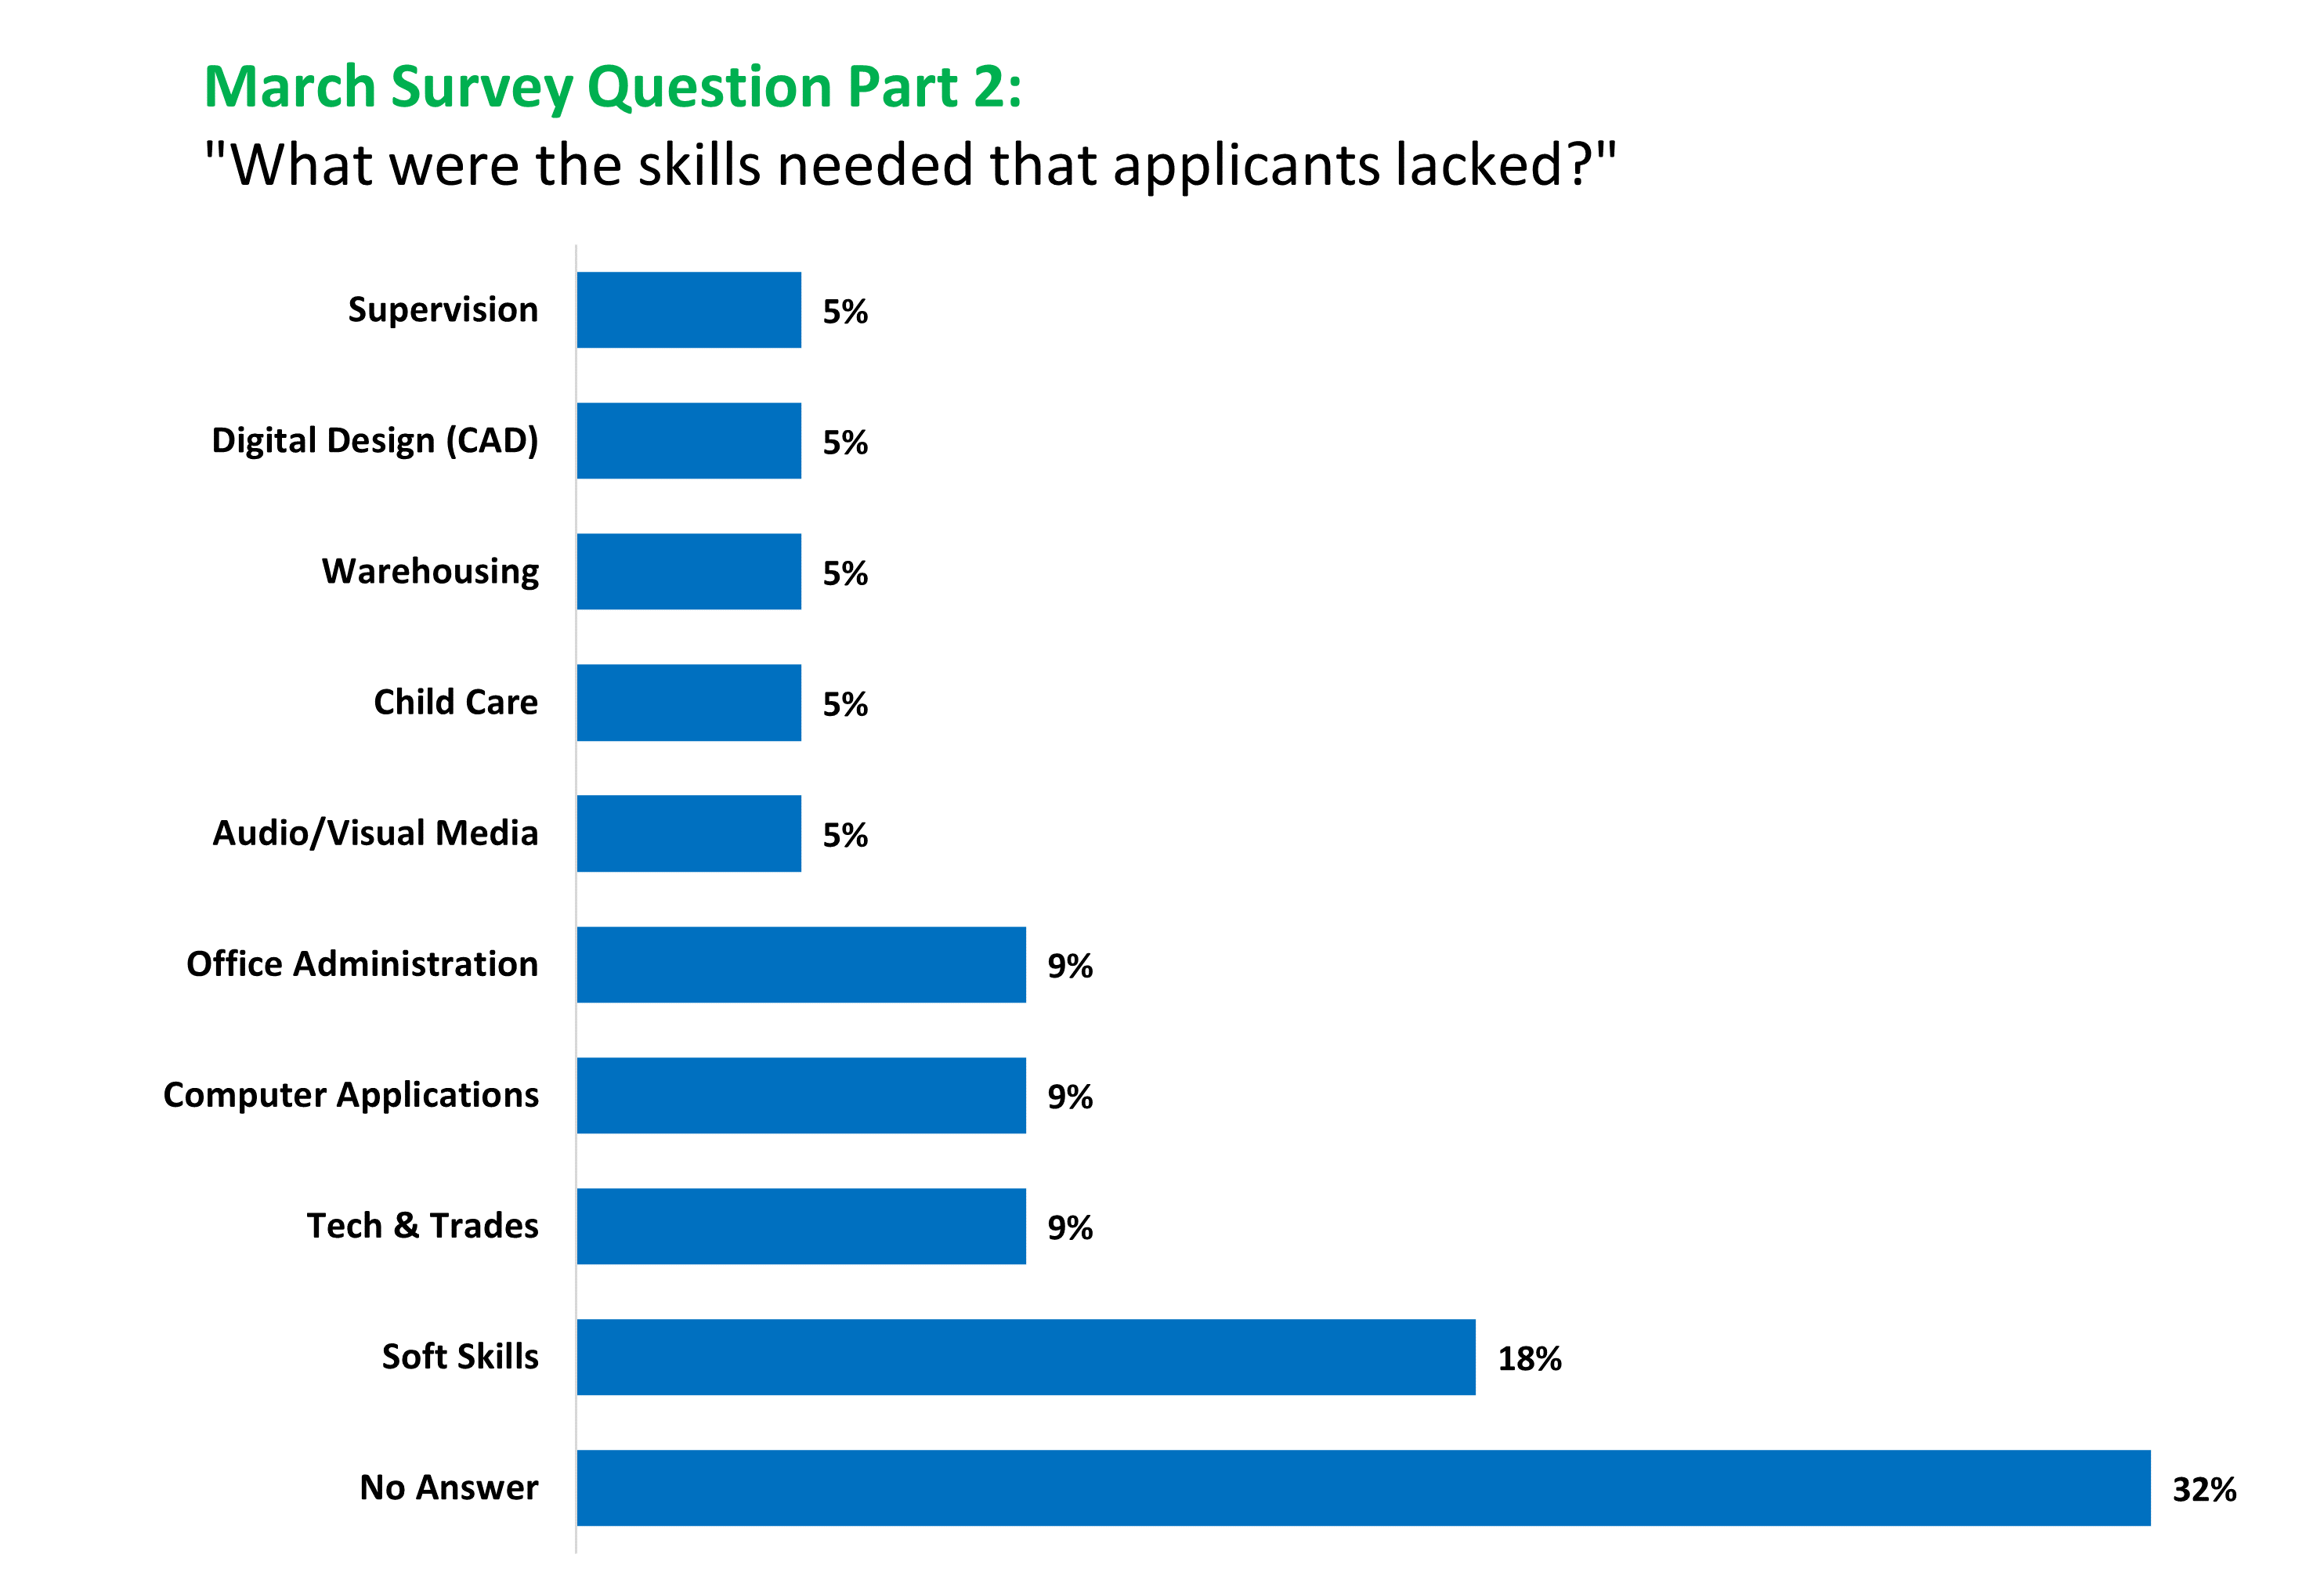 March VBR Survey Question Part 2: What were the skills needed that applicants lacked? Results: Audio/Visual Media 5%, Warehousing 5%, Digital Design (CAD) 5%, Supervision 5%, Child Care 5%, Office Administration 9%, Computer Applications 9%, Tech & Trades 9%, Soft Skills 18%, No Answer 32%